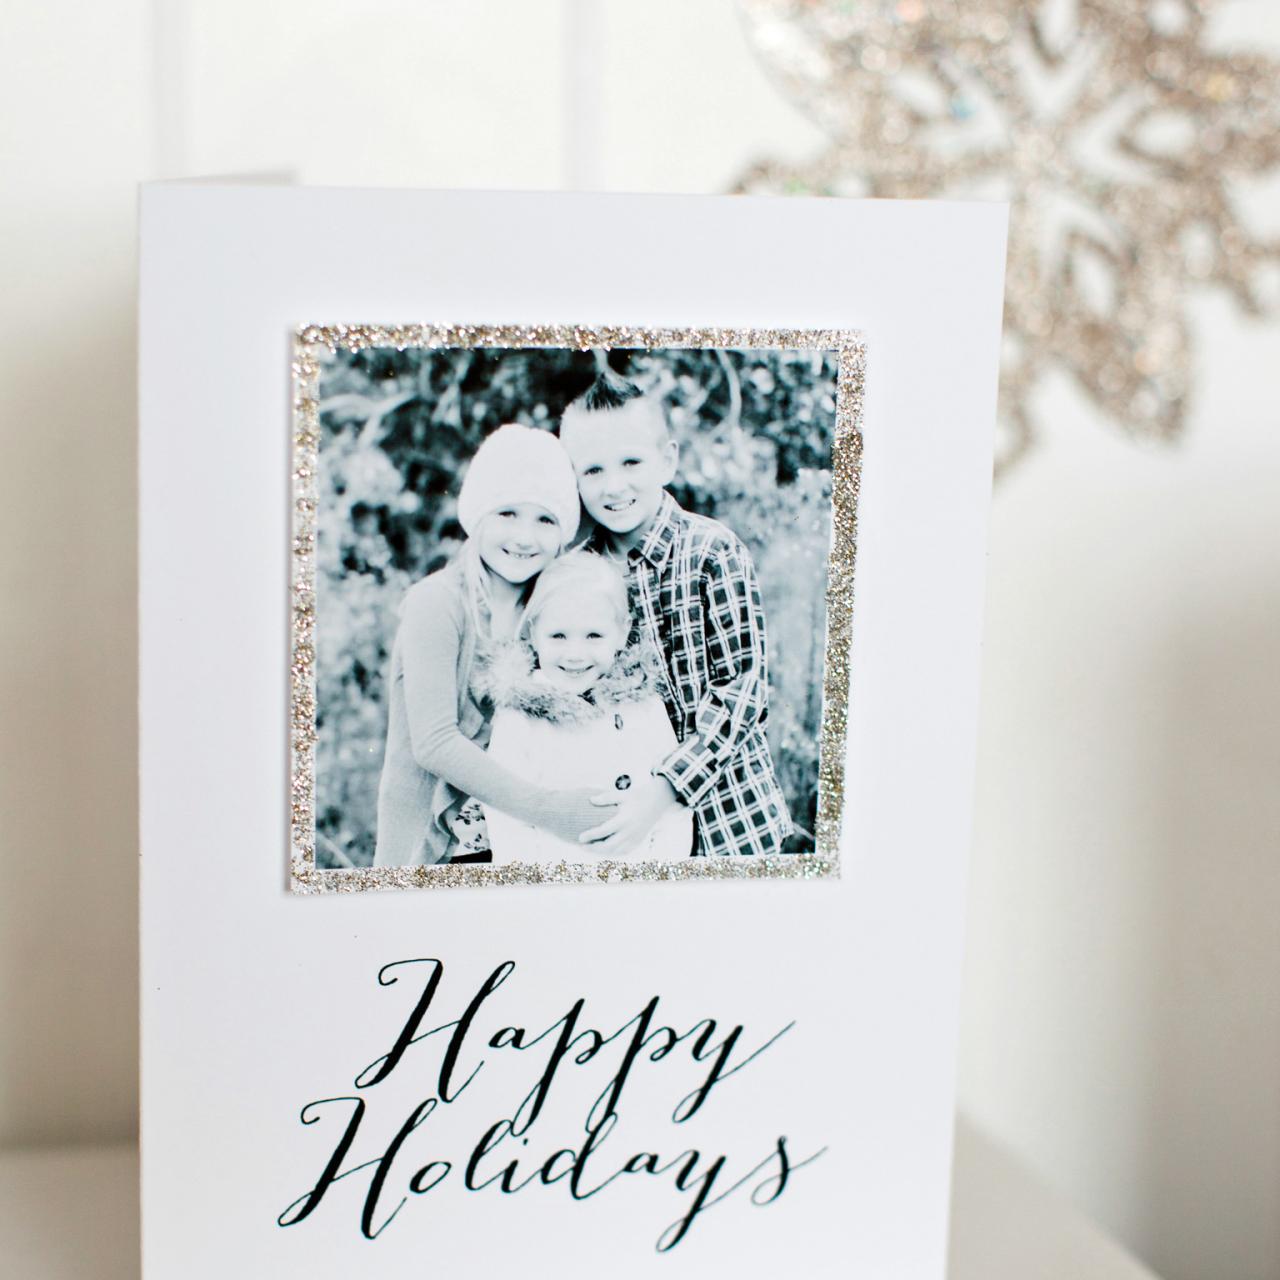 Make Your Own Greeting Cards with This Free Printable Template